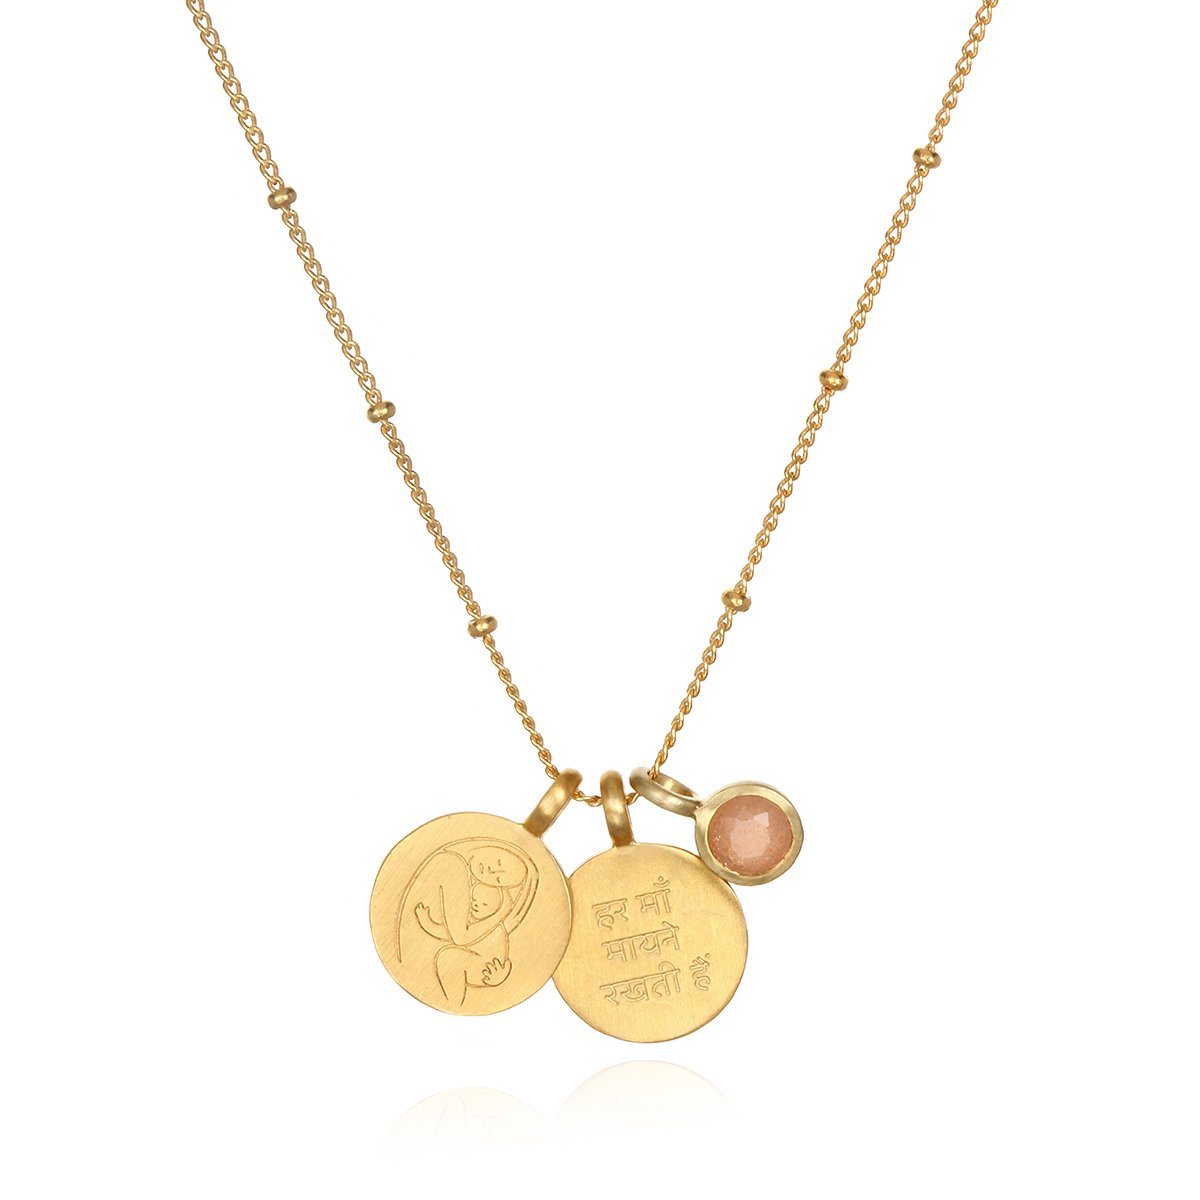 Mother's Love Necklace, $109 @satyajewelry.com - For every piece sold, Satya Jewelry will donate $50 to Every Mother Counts to support its mission.